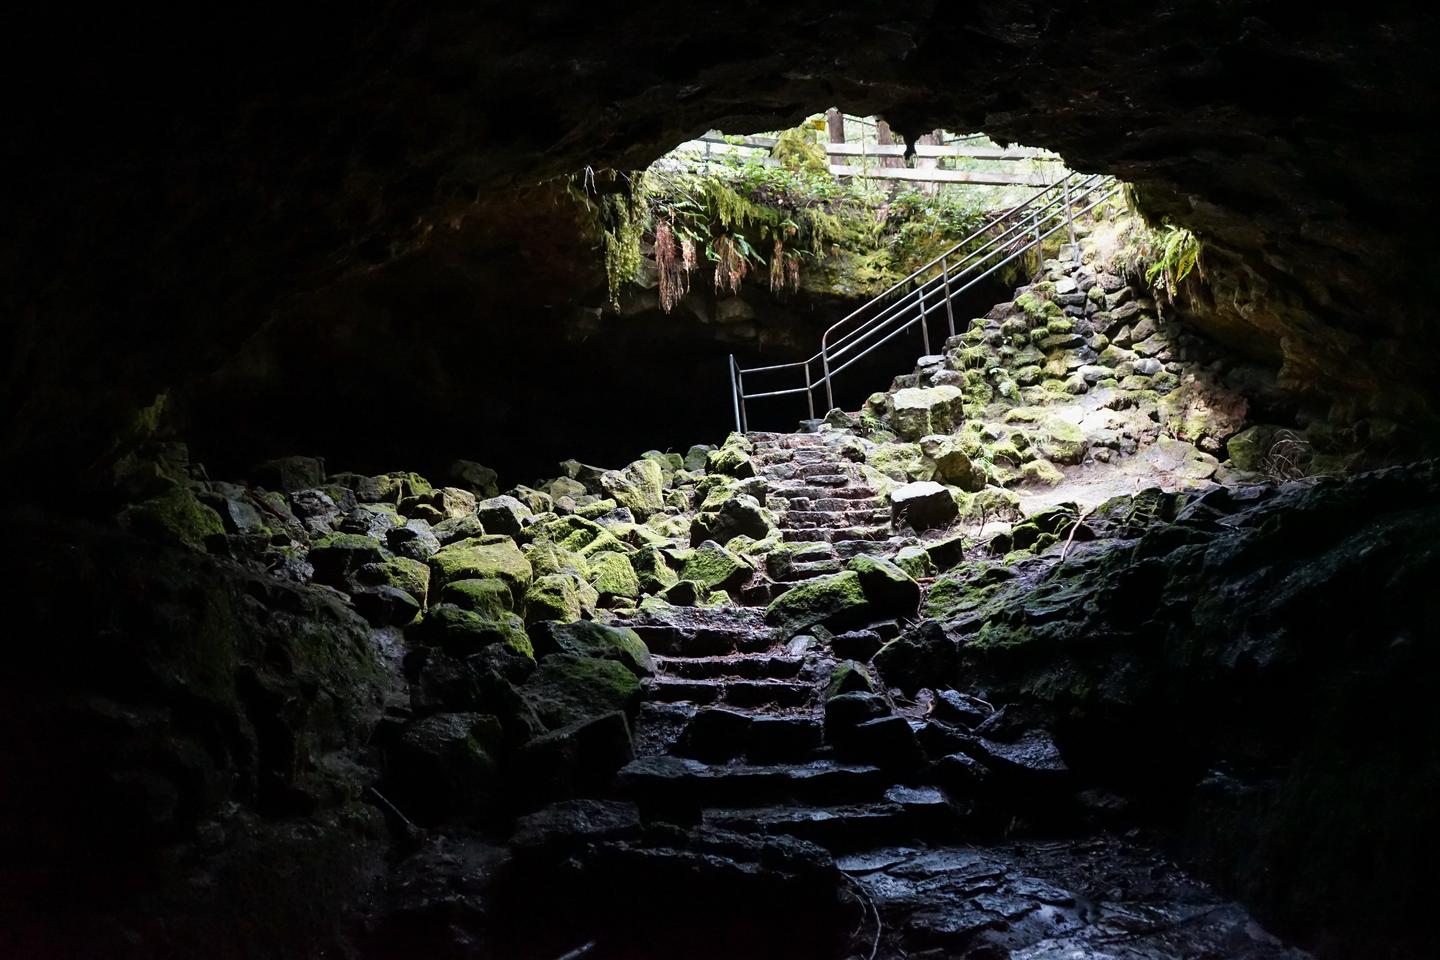 A picture of the staircase leading into Ape Cave at Mount St. Helens National Volcanic MonumentWhen visiting Ape Cave, the adventure begins by descending a stone and metal staircase into the darkness.